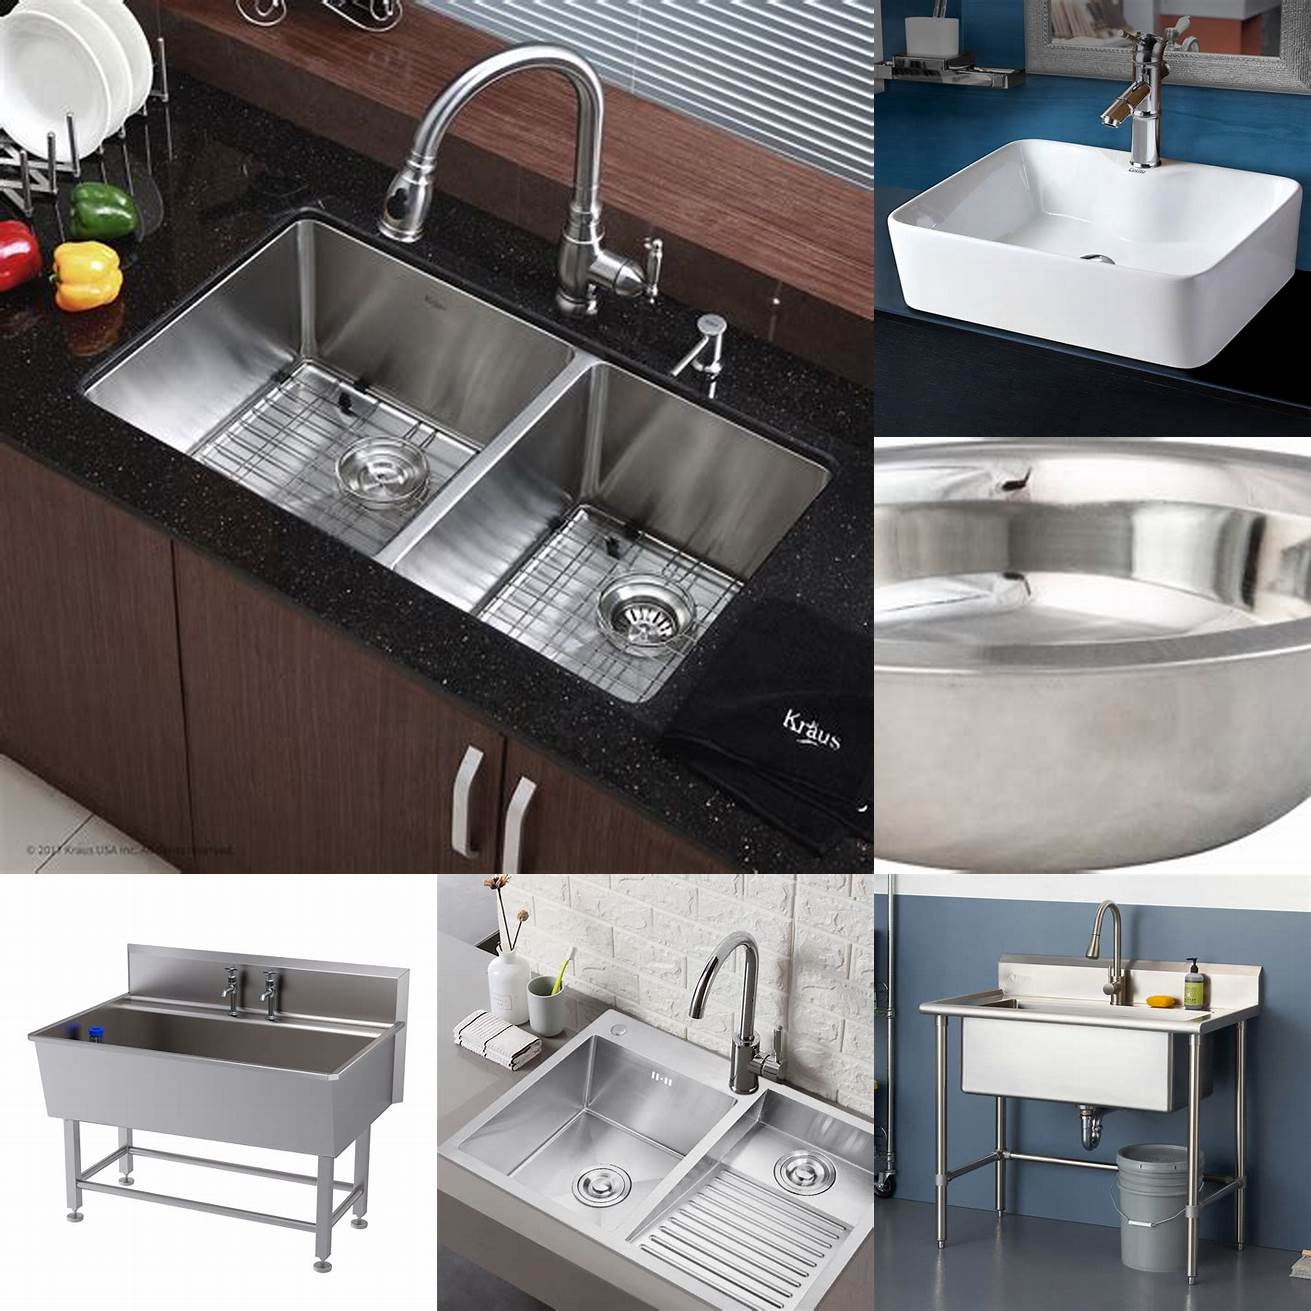 Large and deep basin for easy washing